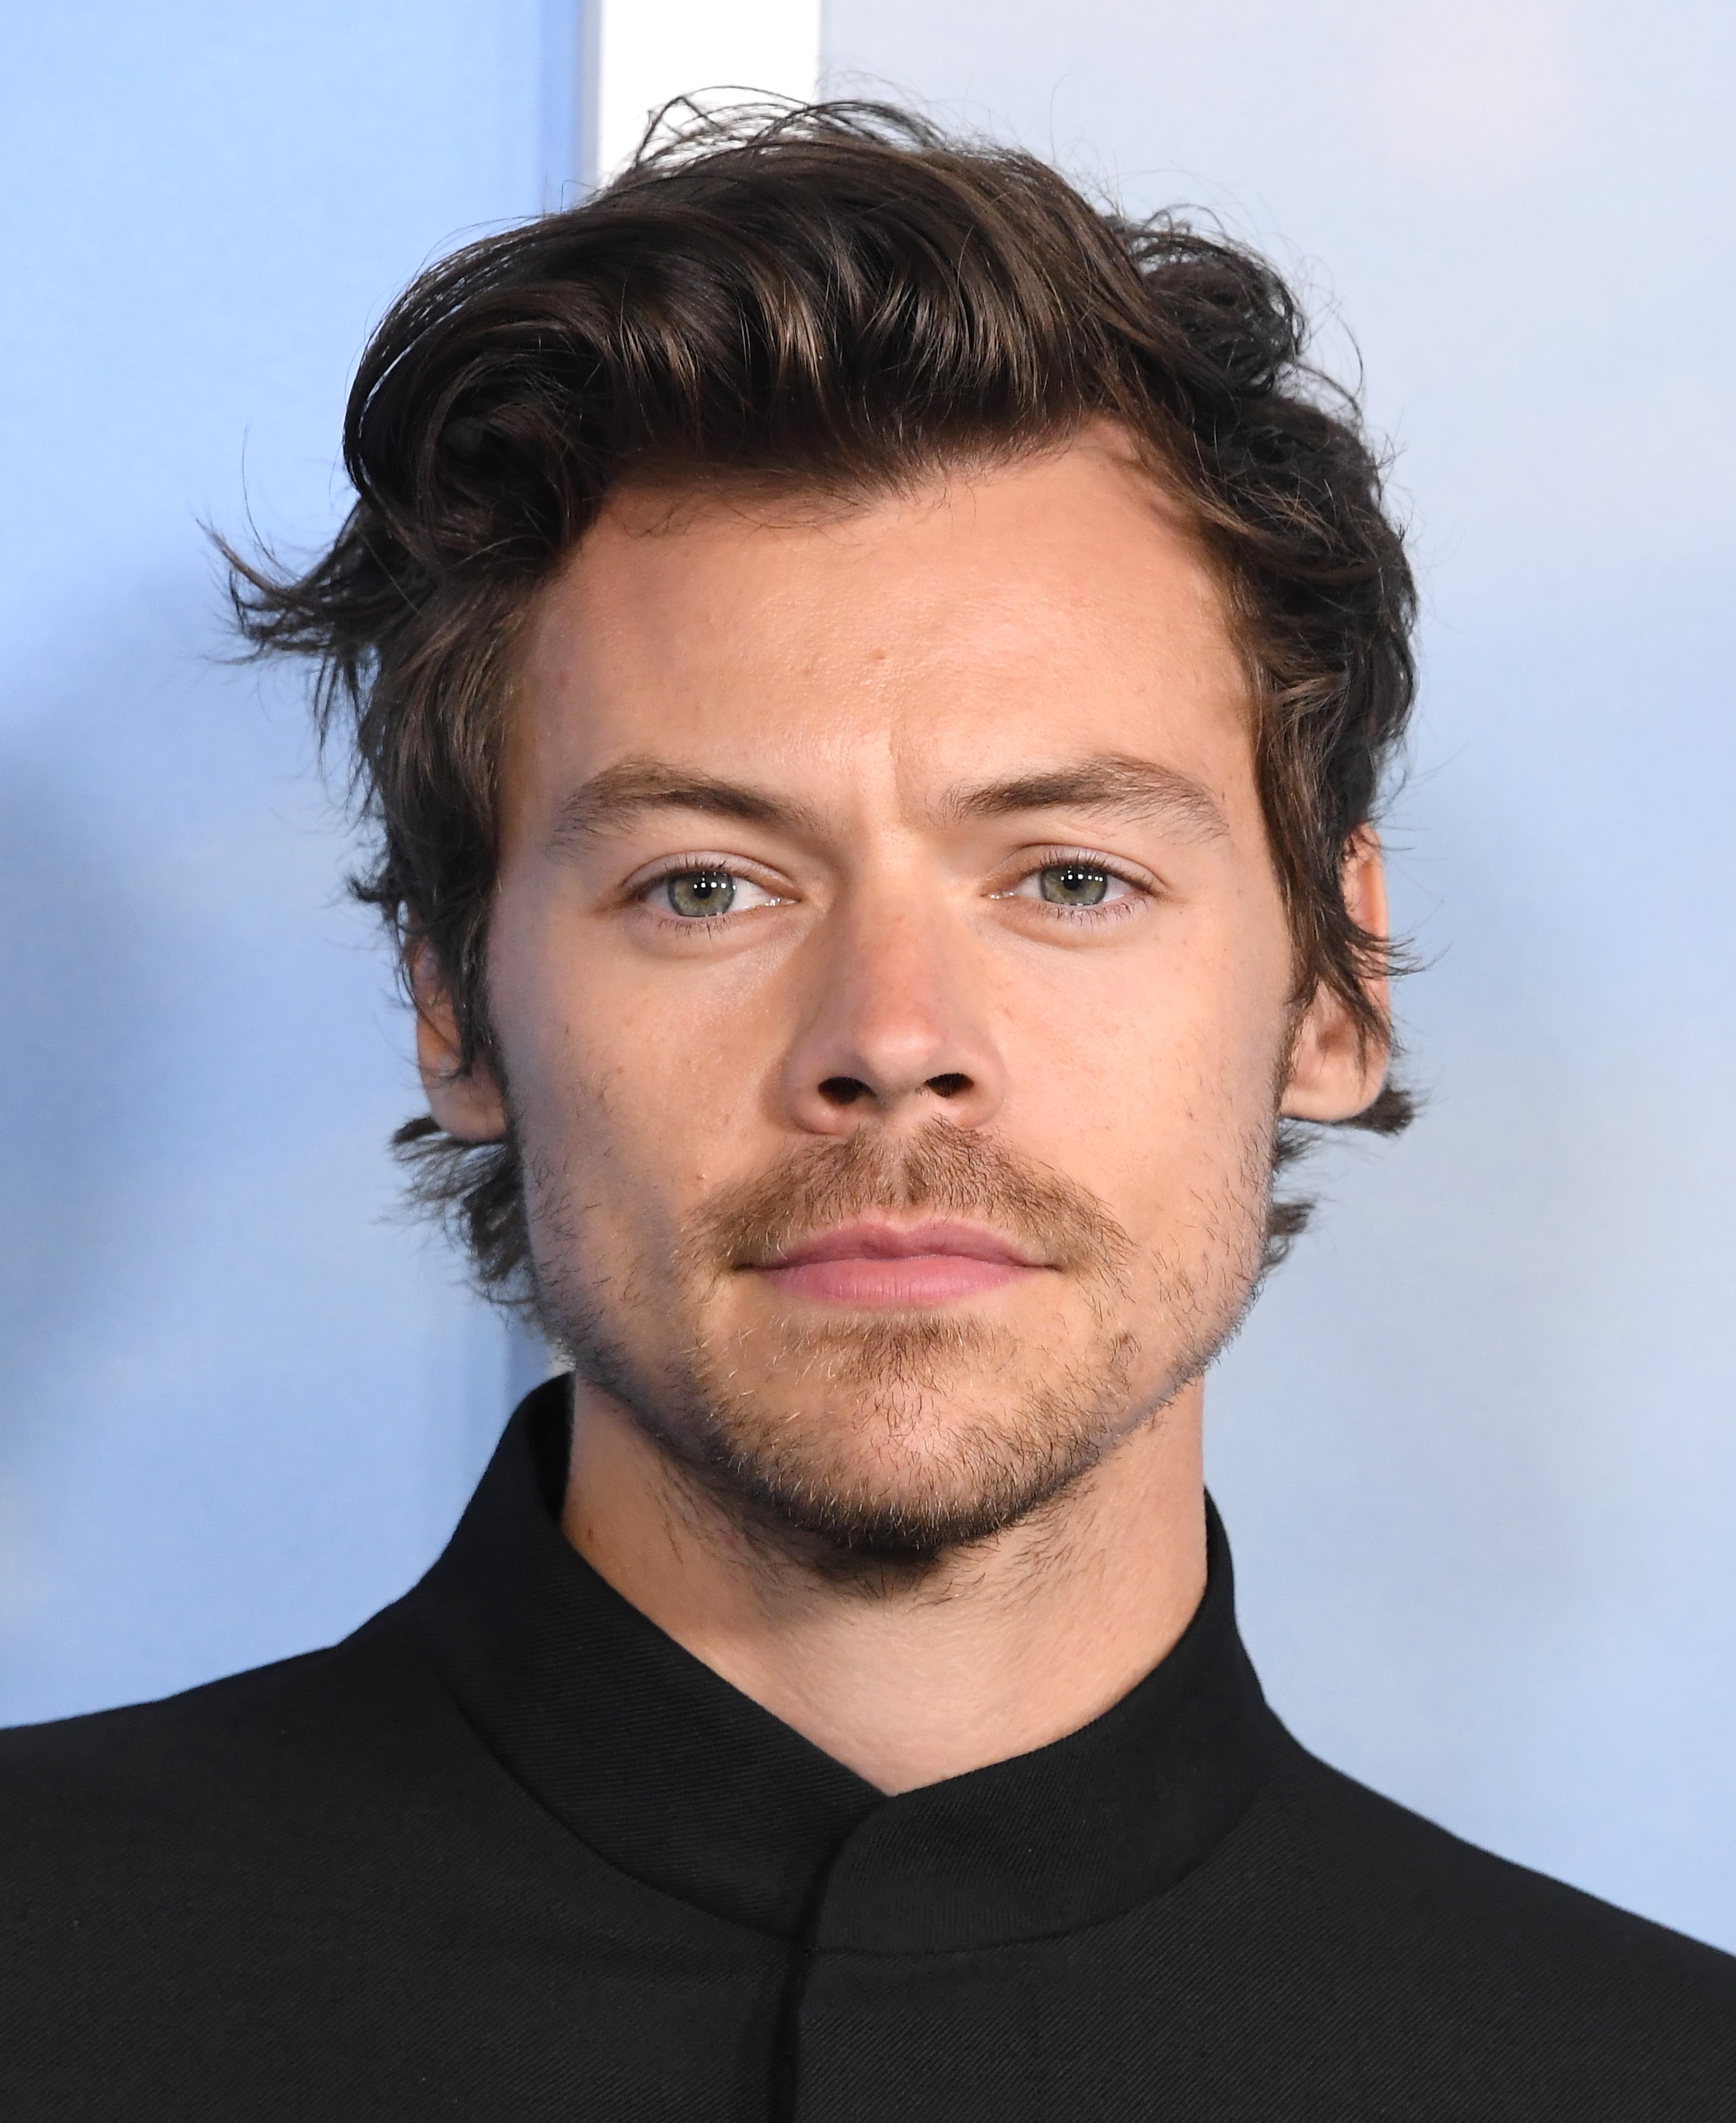 Well, Harry Styles Shaved His Head